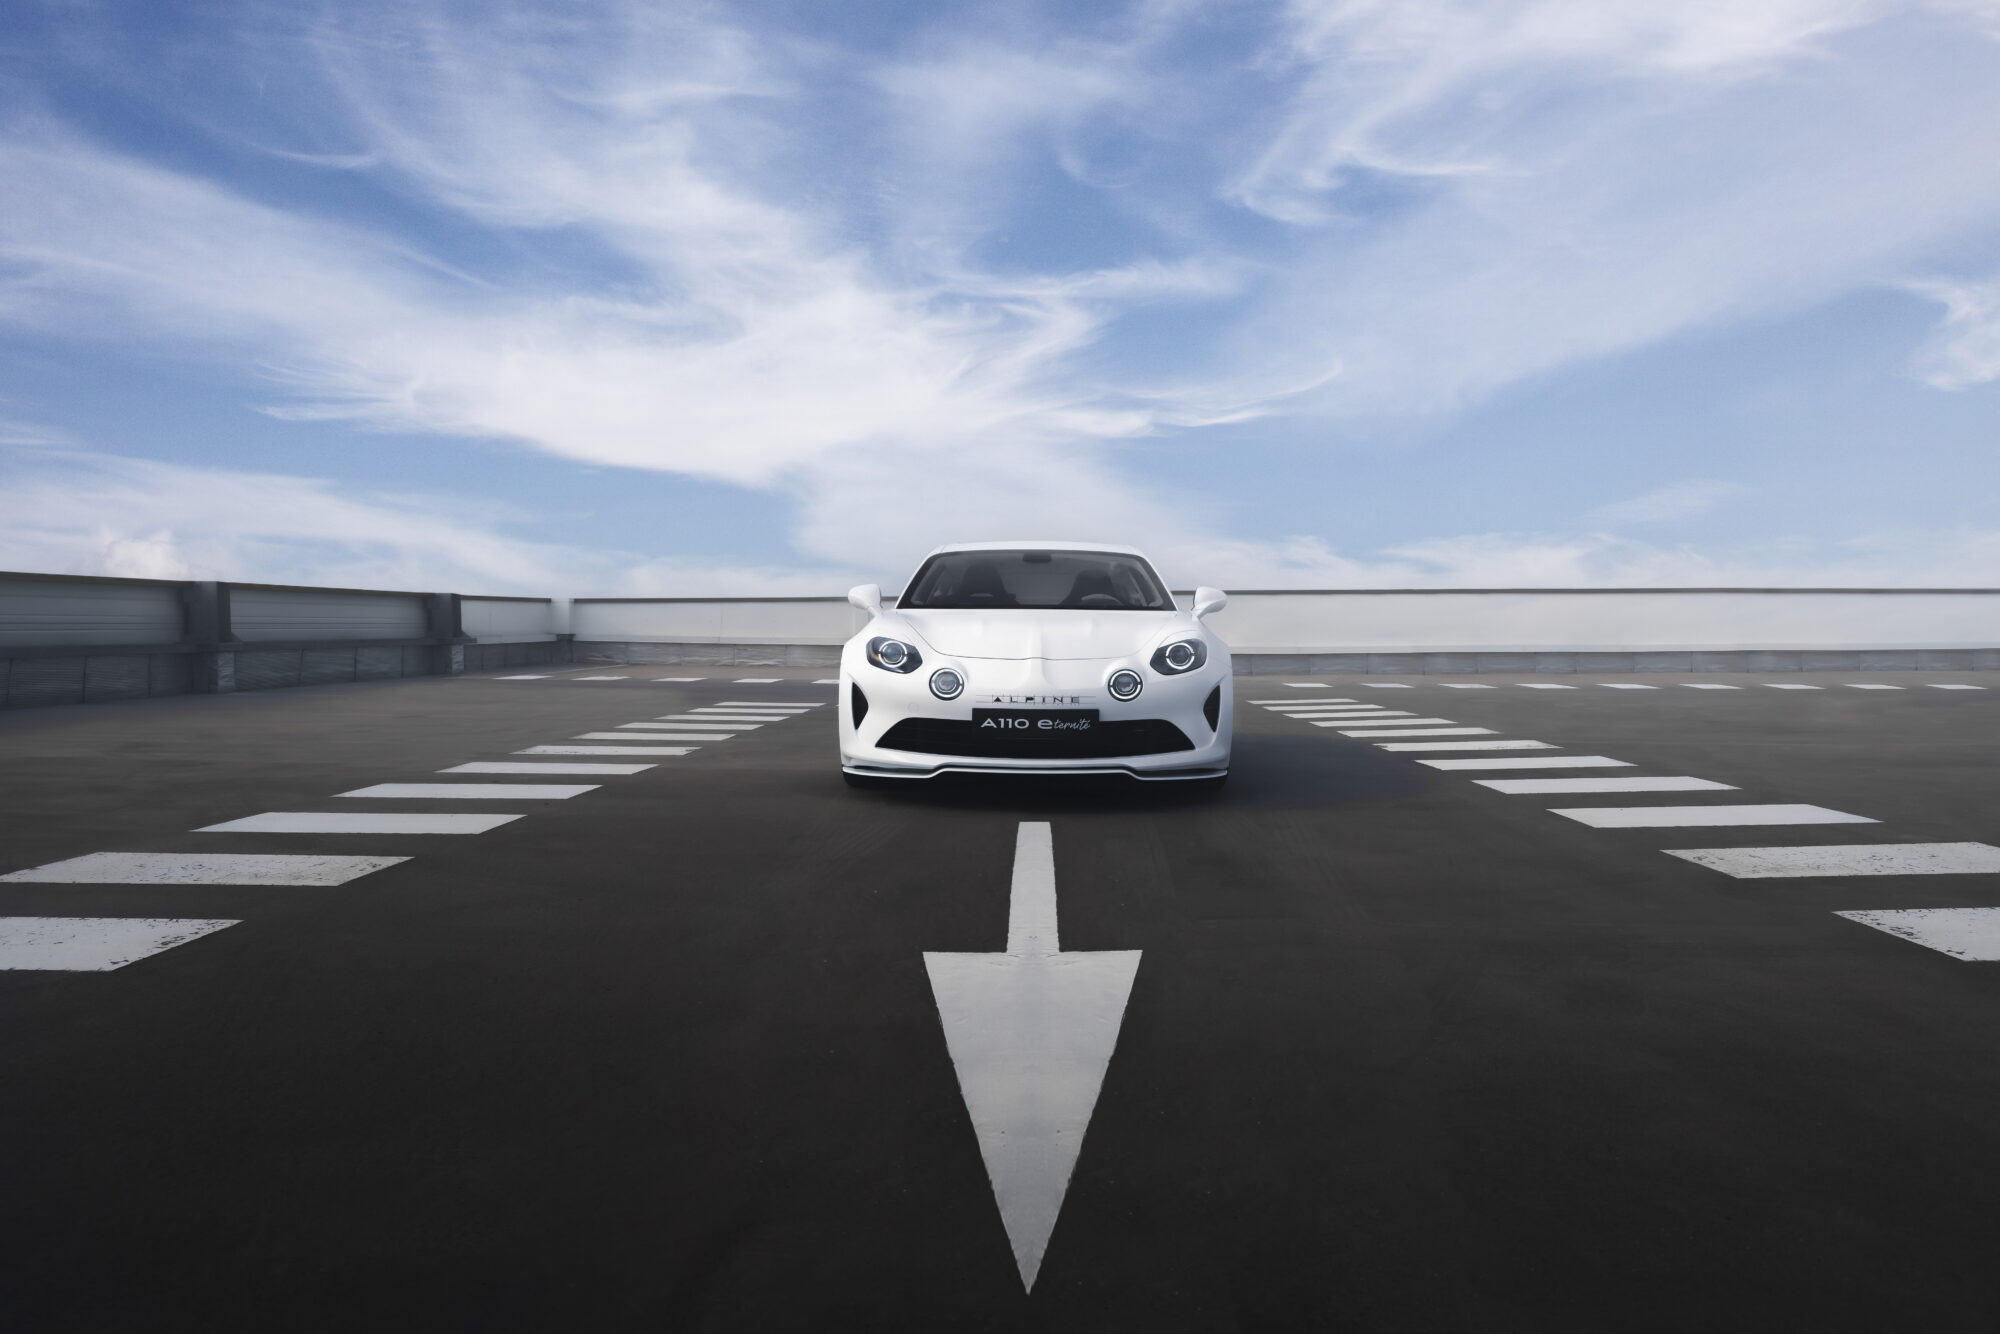 2022 - A110 E-ternite _ a 100% electric prototype at the cutting edge of Alpine innovation (3)